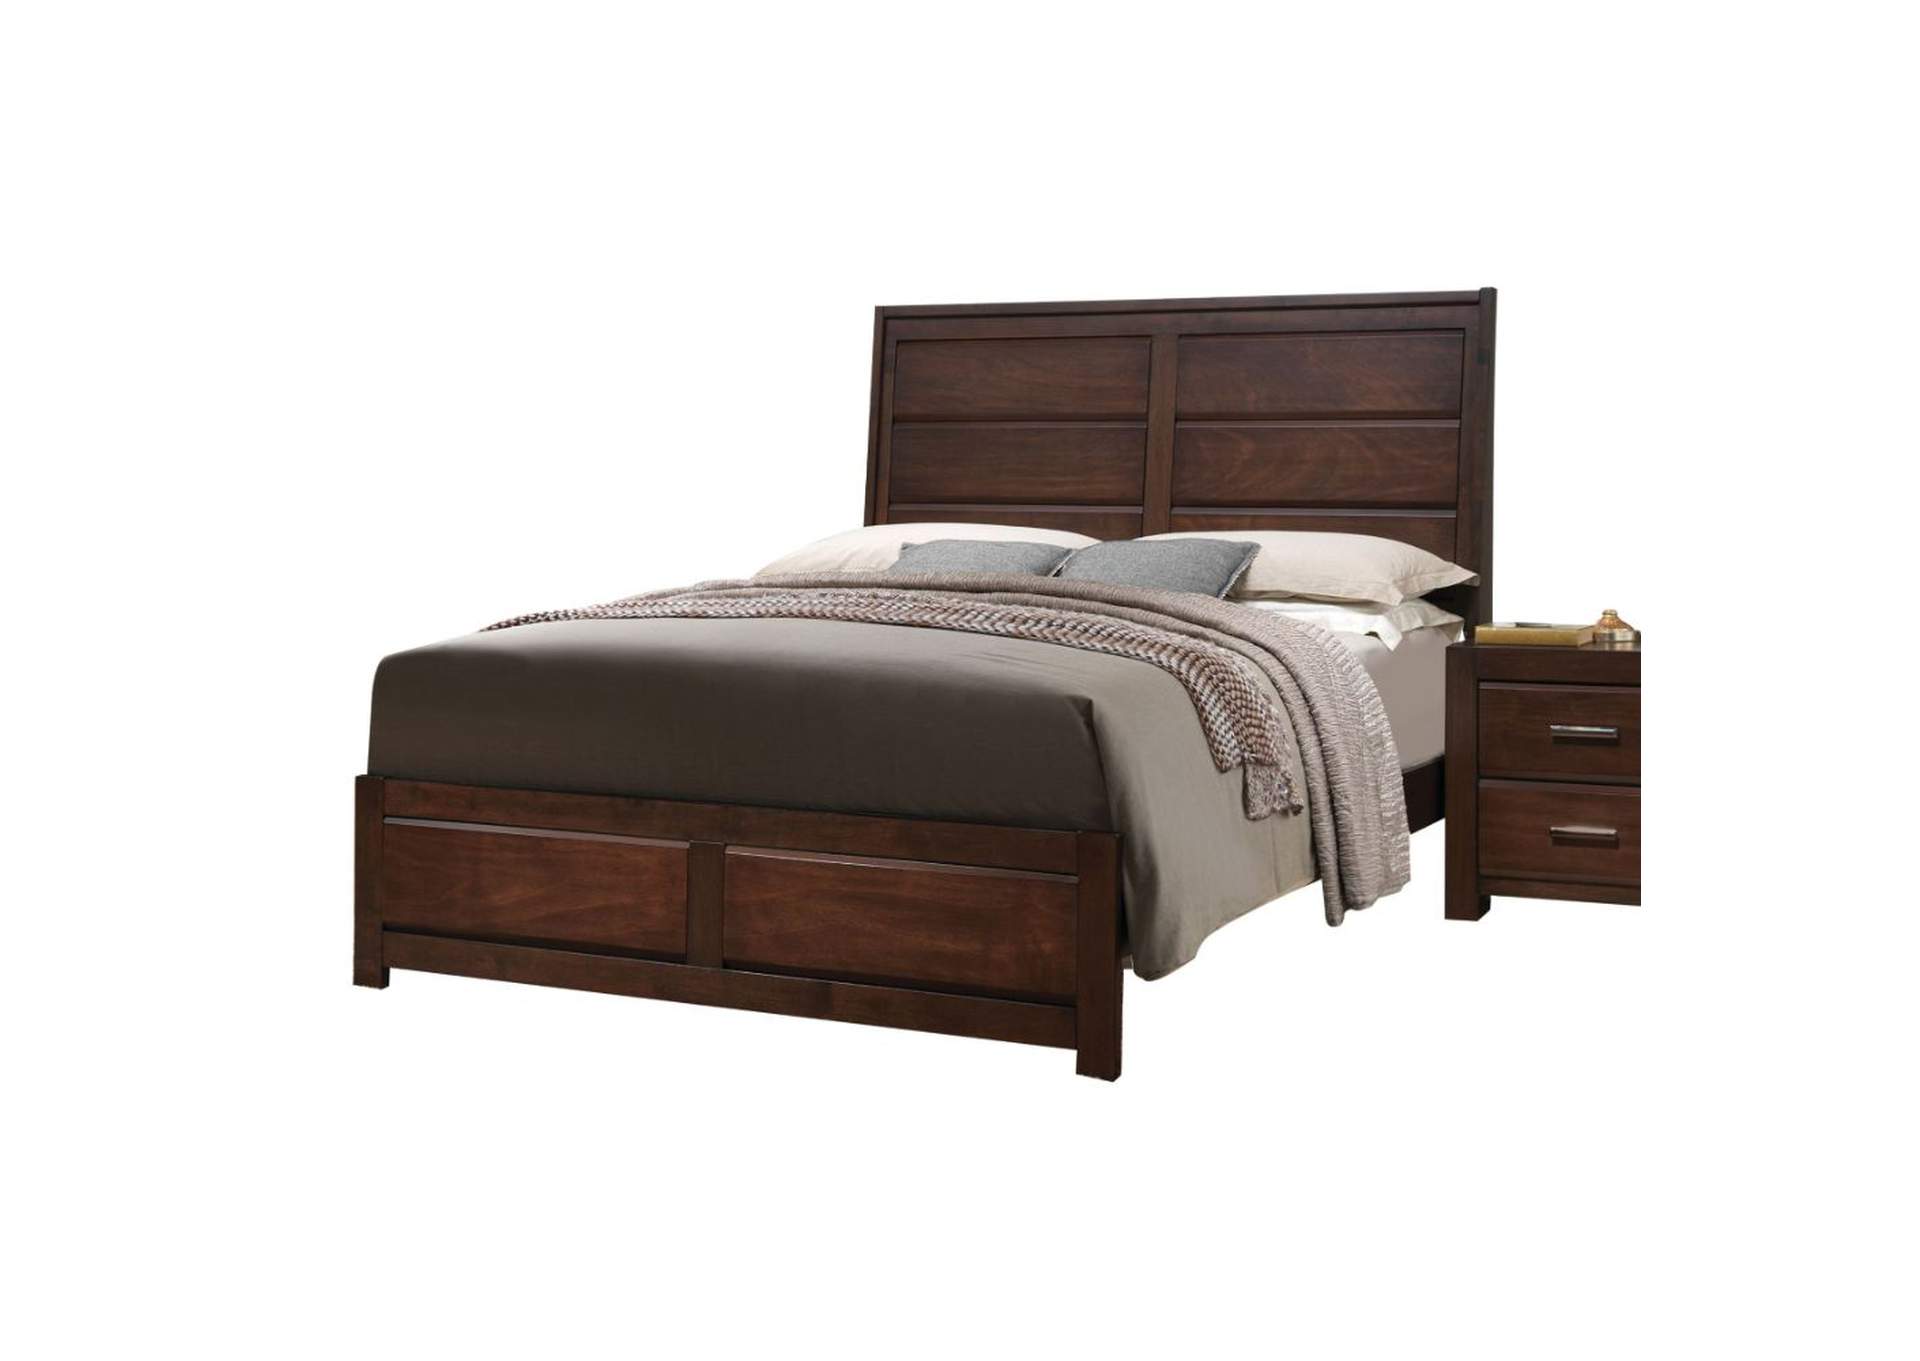 Oberreit Eastern King Bed,Acme